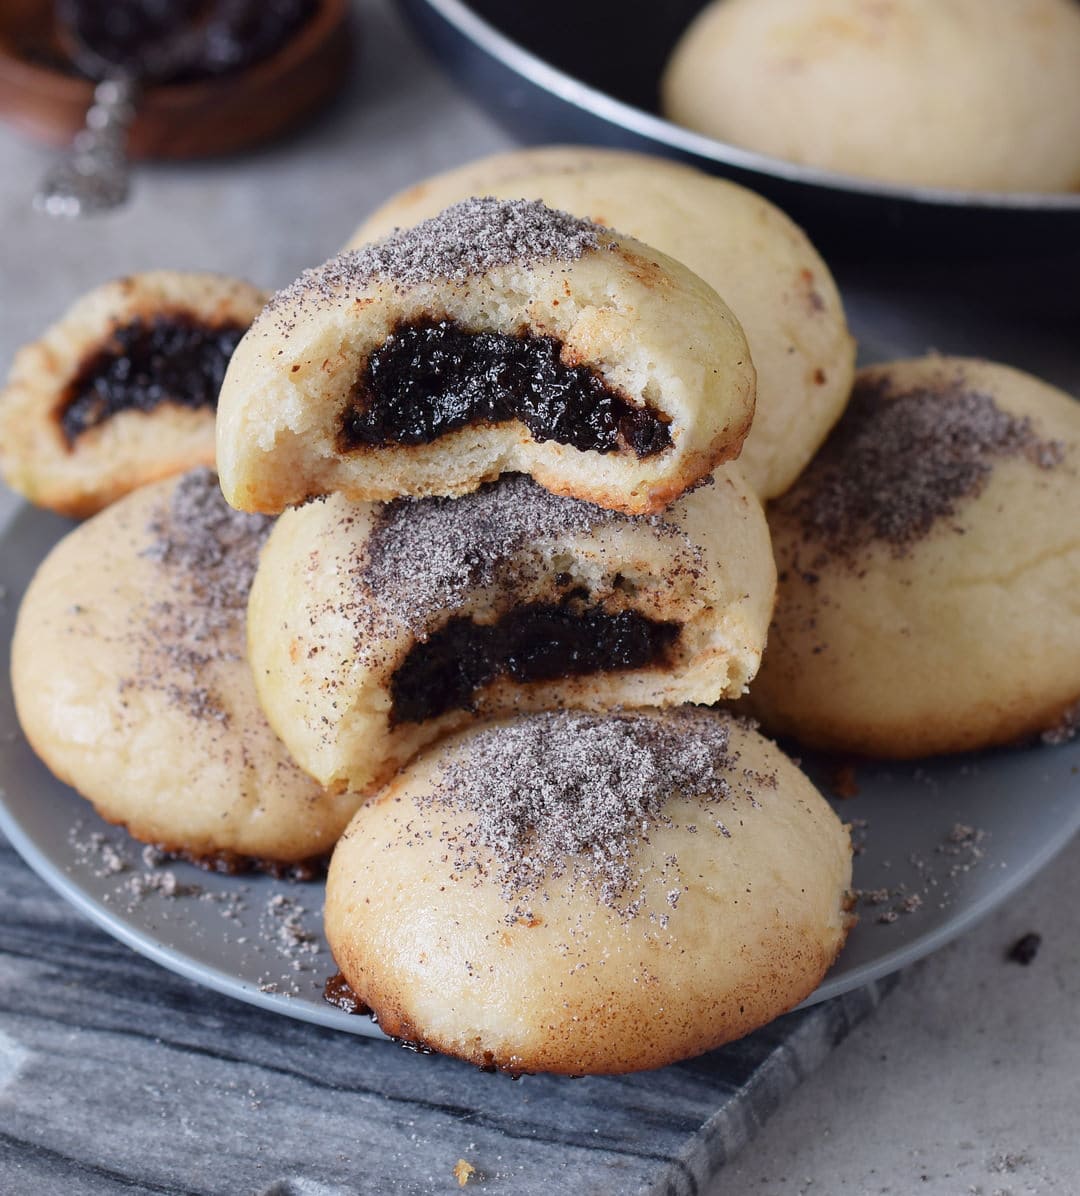 sweet steamed rolls with plum jam filling and poppy seeds